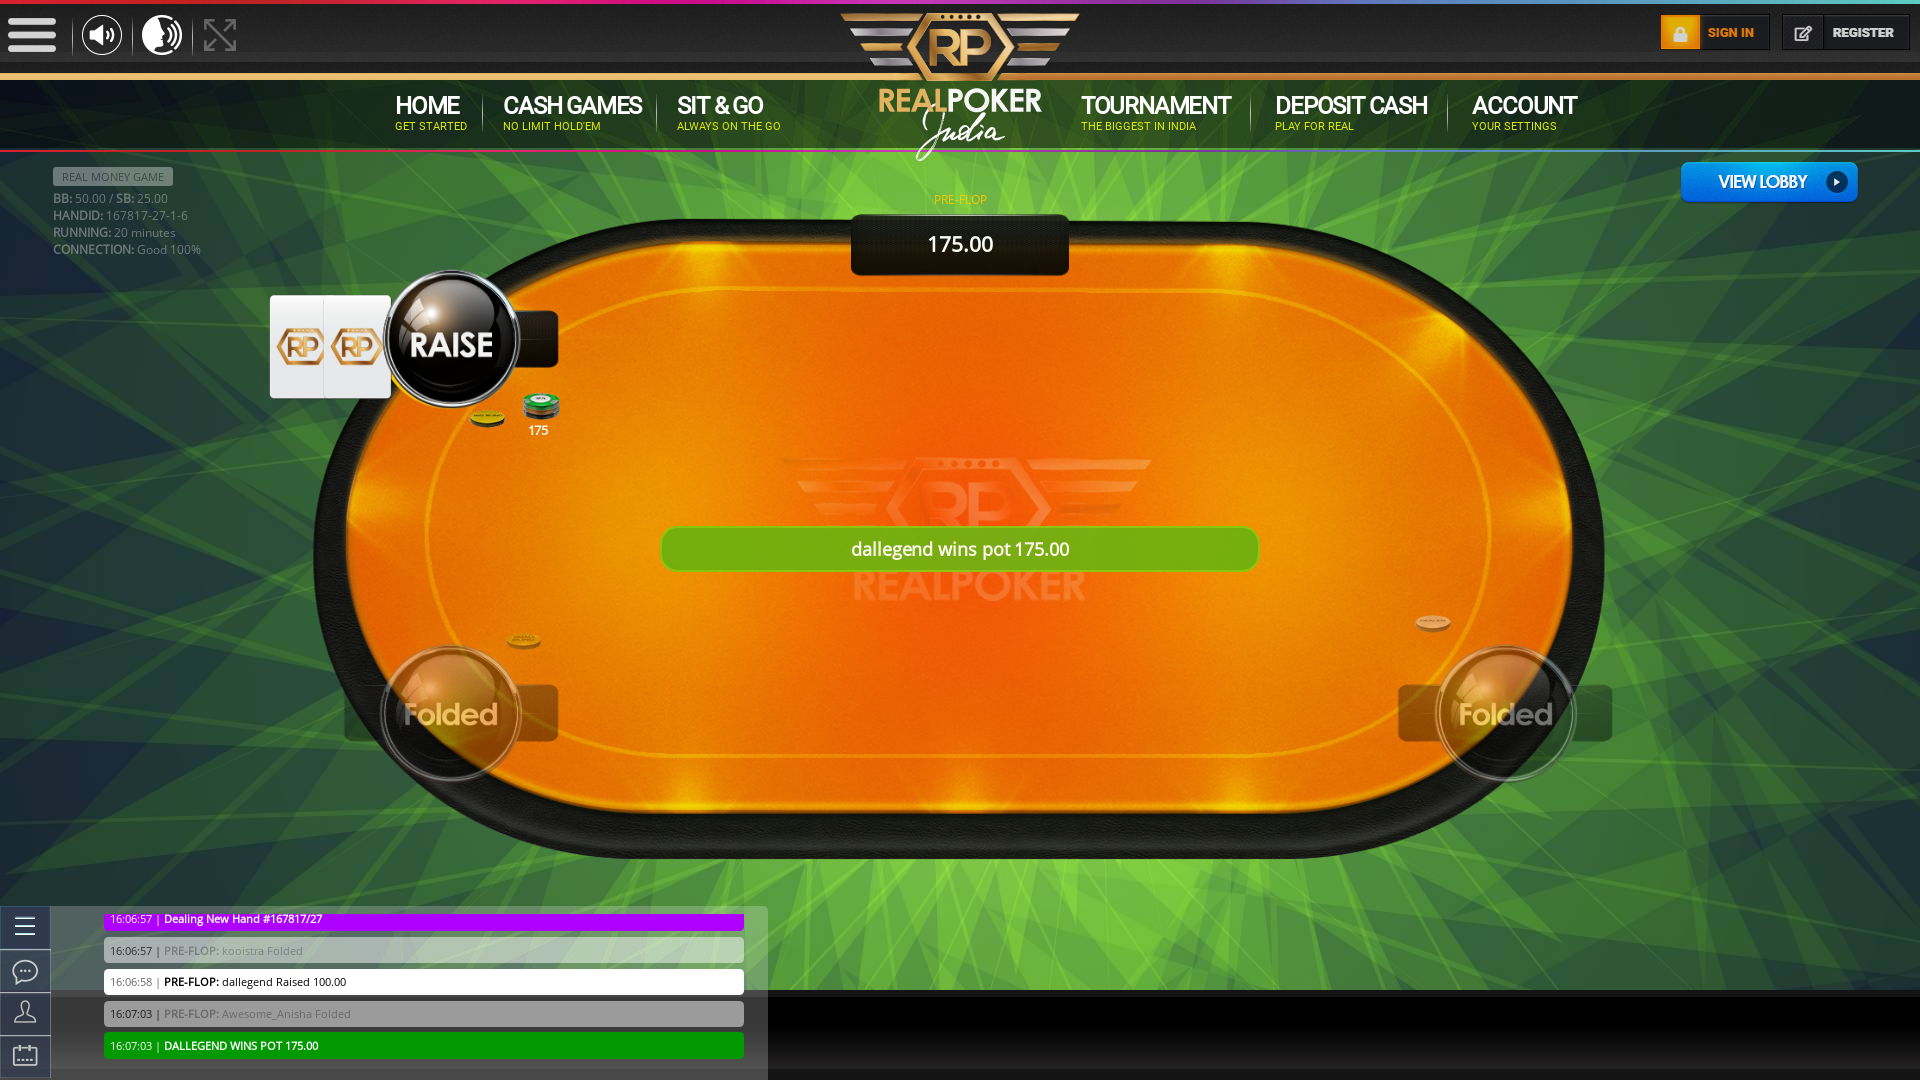 10 player texas holdem table at real poker with the table id 167817